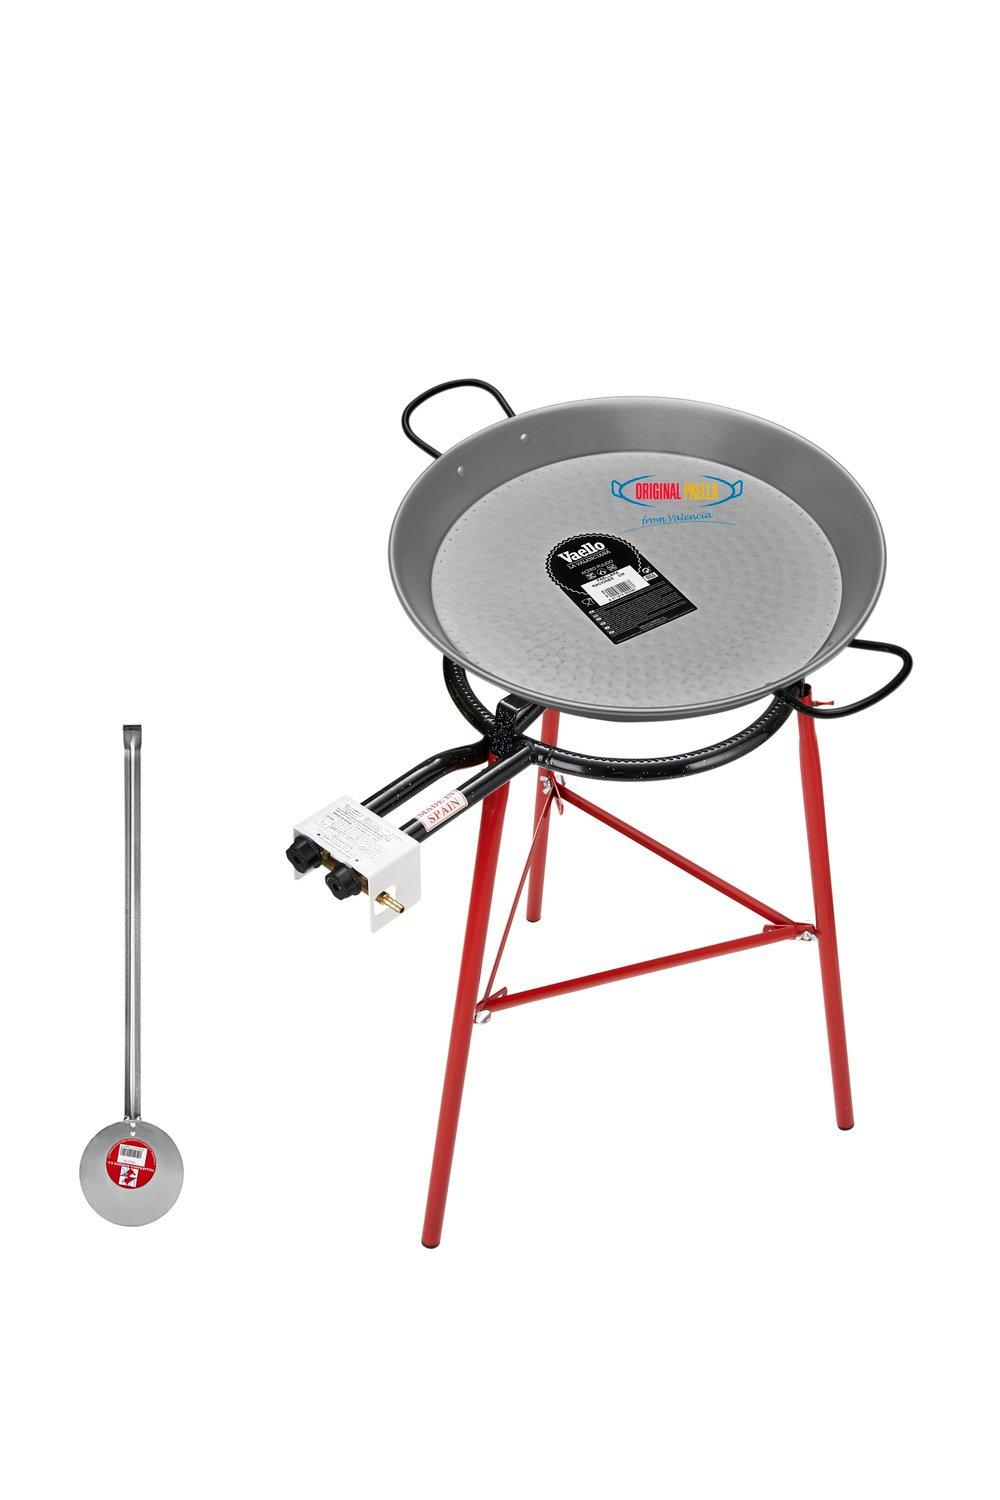 Paella Cooking Set with 70cm Polished Steel Paella Pan